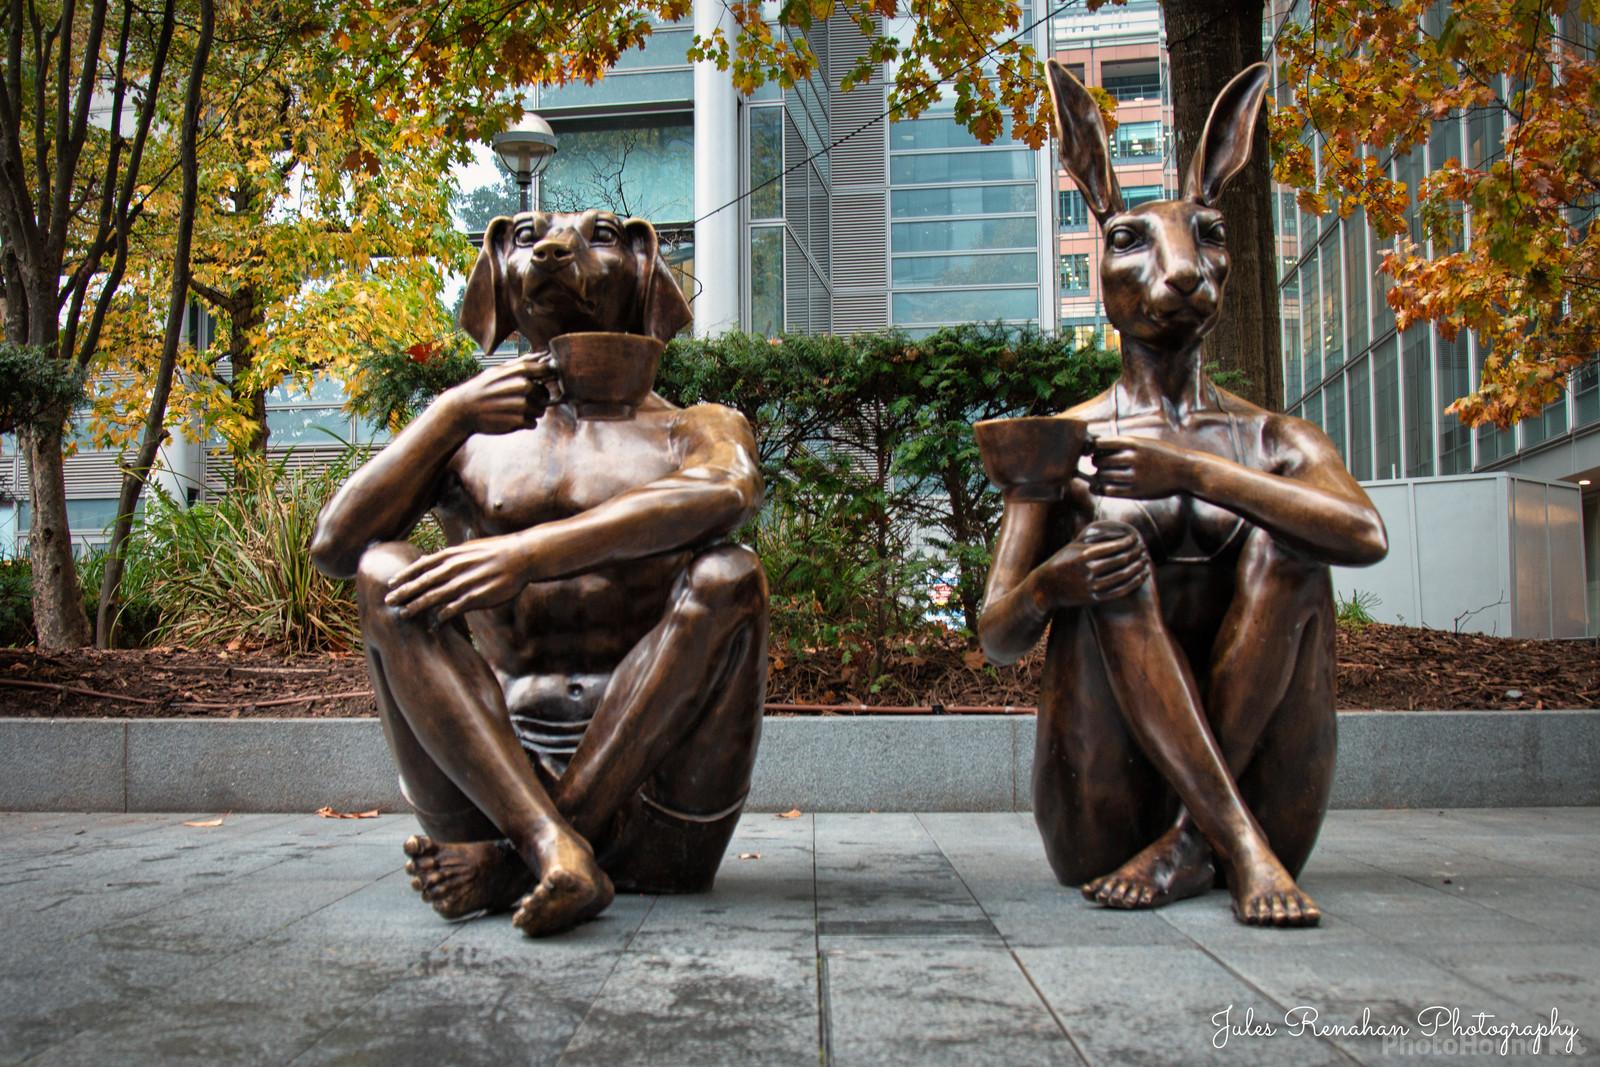 Image of Dogman & Rabbitwoman Sculpture by Jules Renahan